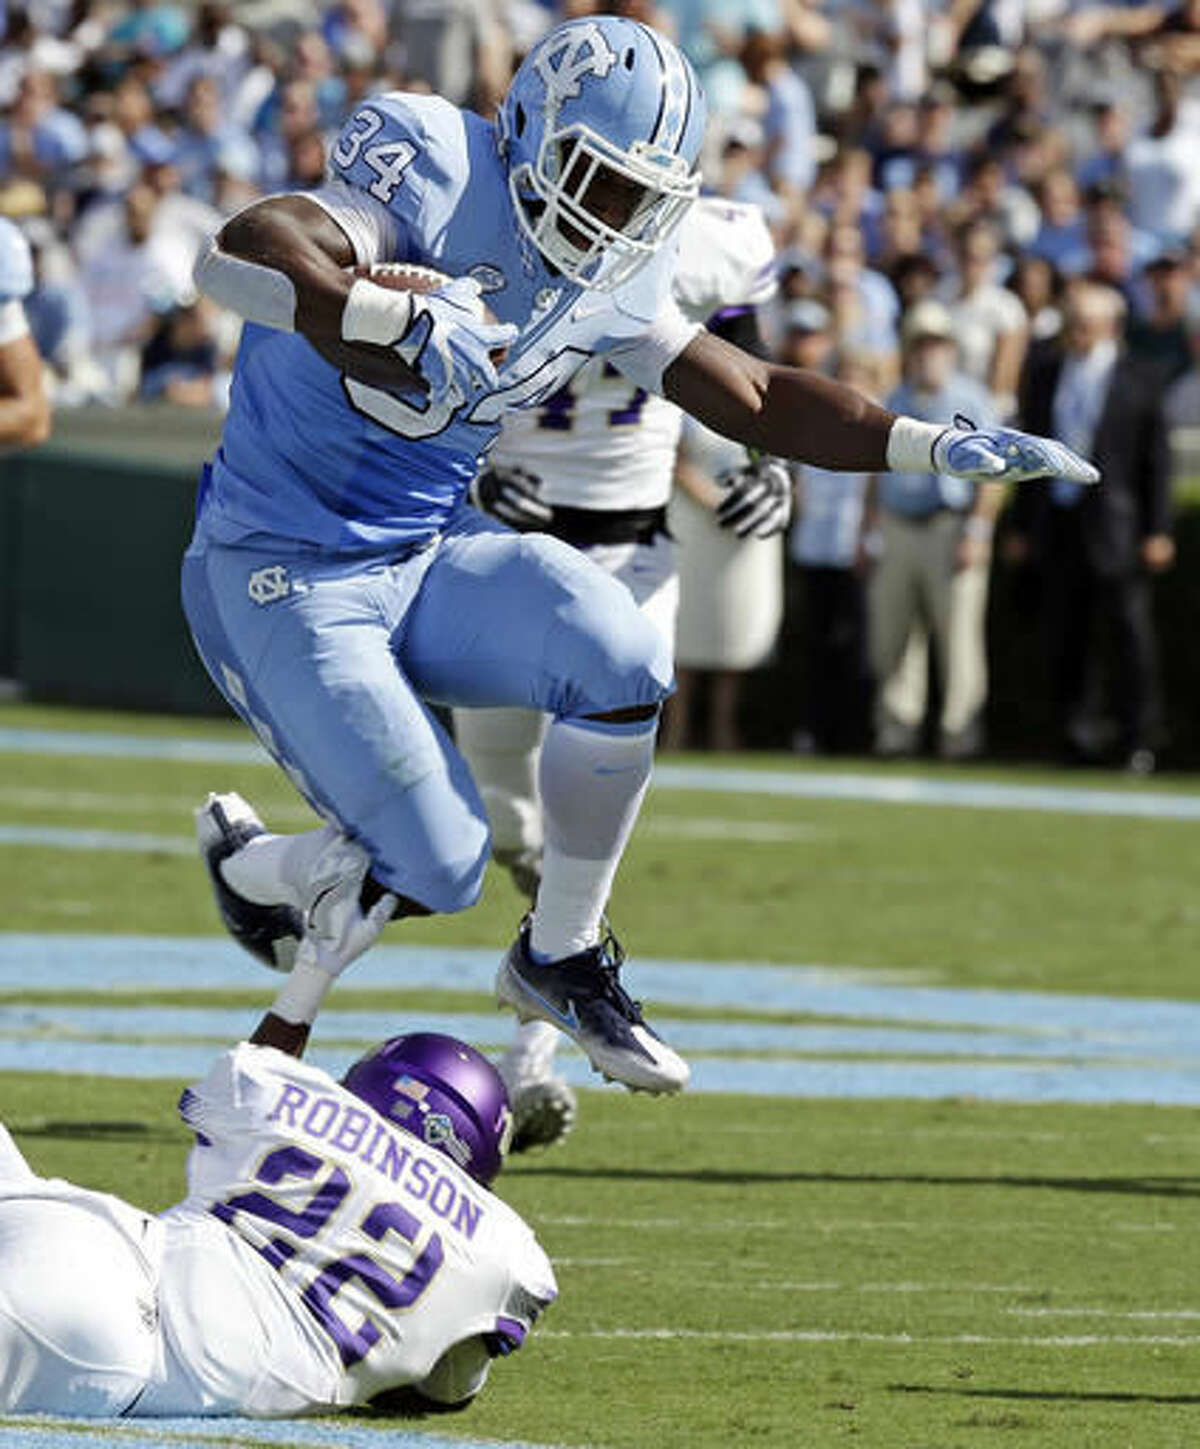 FILE - In this Sept. 17, 2016, file photo, North Carolina's Elijah Hood (34) jumps over James Madison's Rashad Robinson (22) during the first half of an NCAA college football game in Chapel Hill, N.C. North Carolina coach Larry Fedora said Wednesday, Oct. 2, 2016, he expects Hood to play this week at No. 16 Miami. Hood missed last week's 34-3 loss to Virginia Tech with a concussion. (AP Photo/Gerry Broome, File)